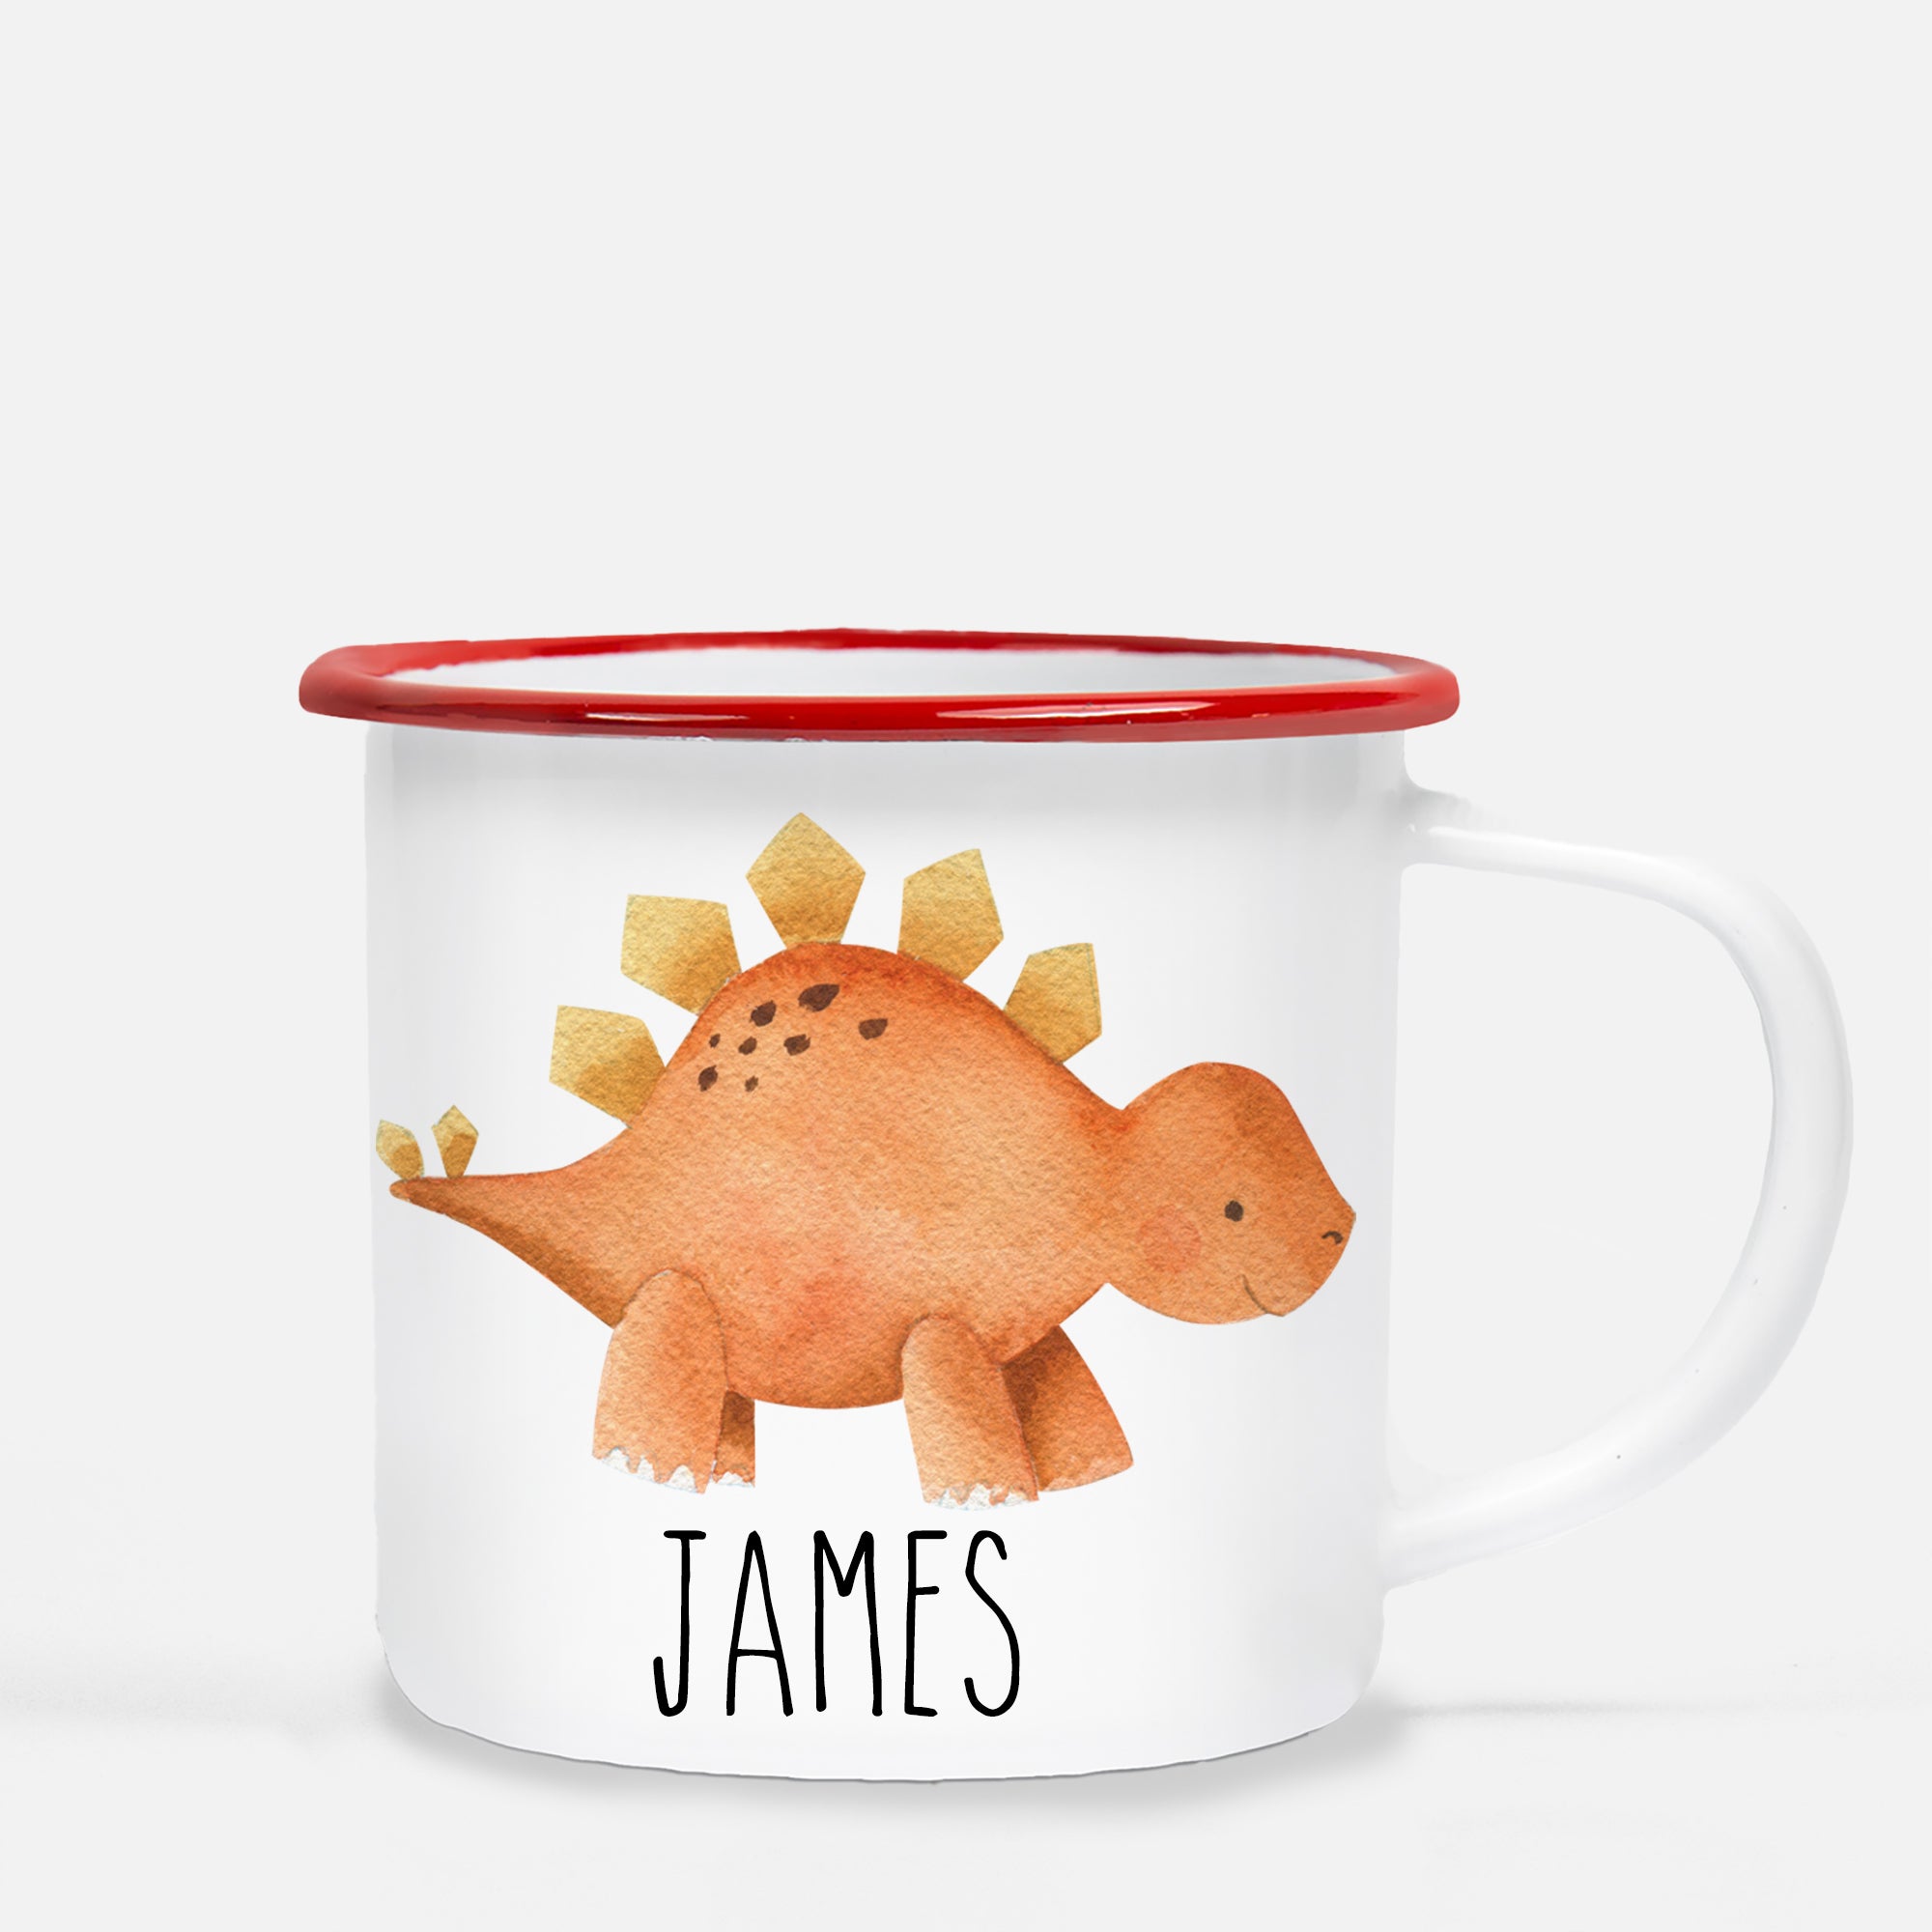 Dinosaur Camp Mug, Stegasaurus, Personalized with your Child's name, PIPSY.COM, red lip